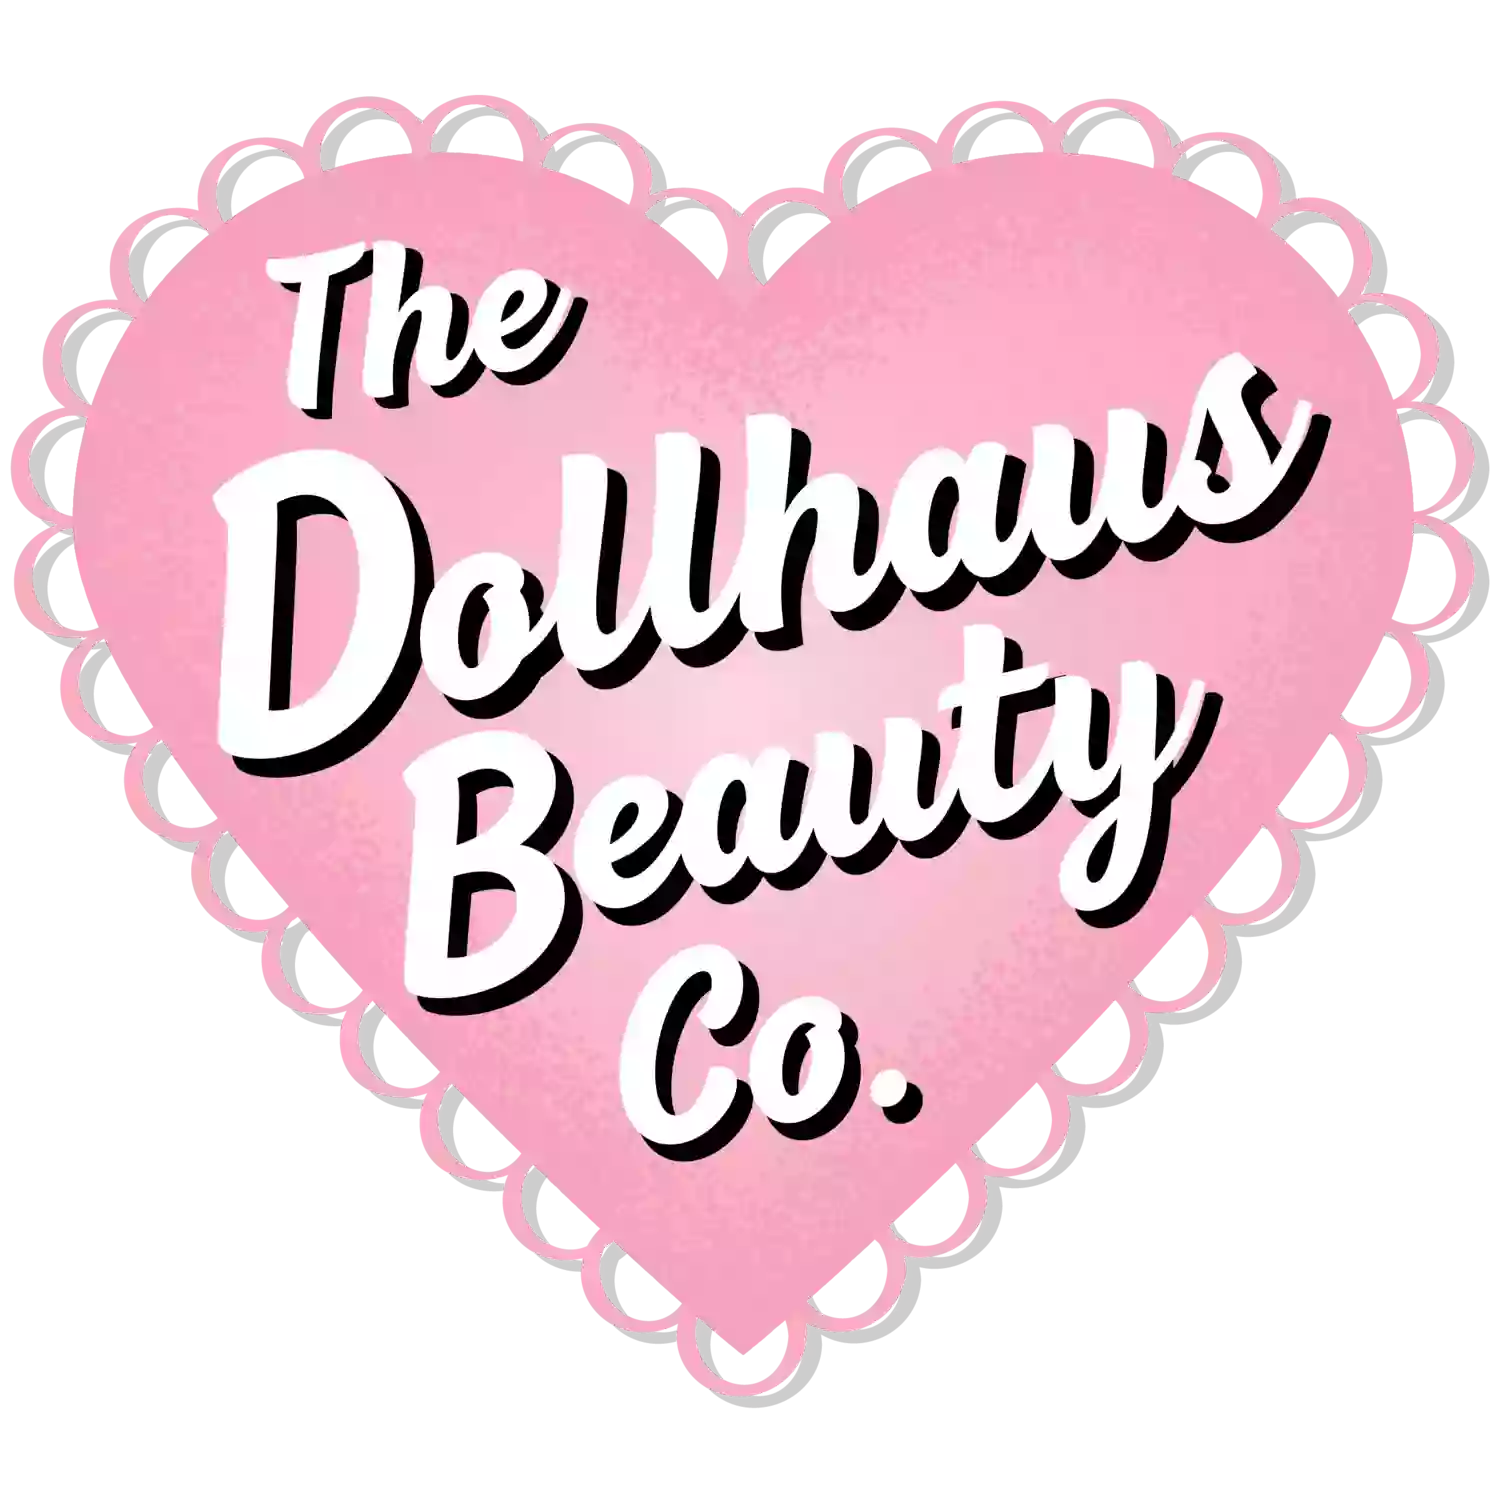 The Dollhaus Beauty Co.